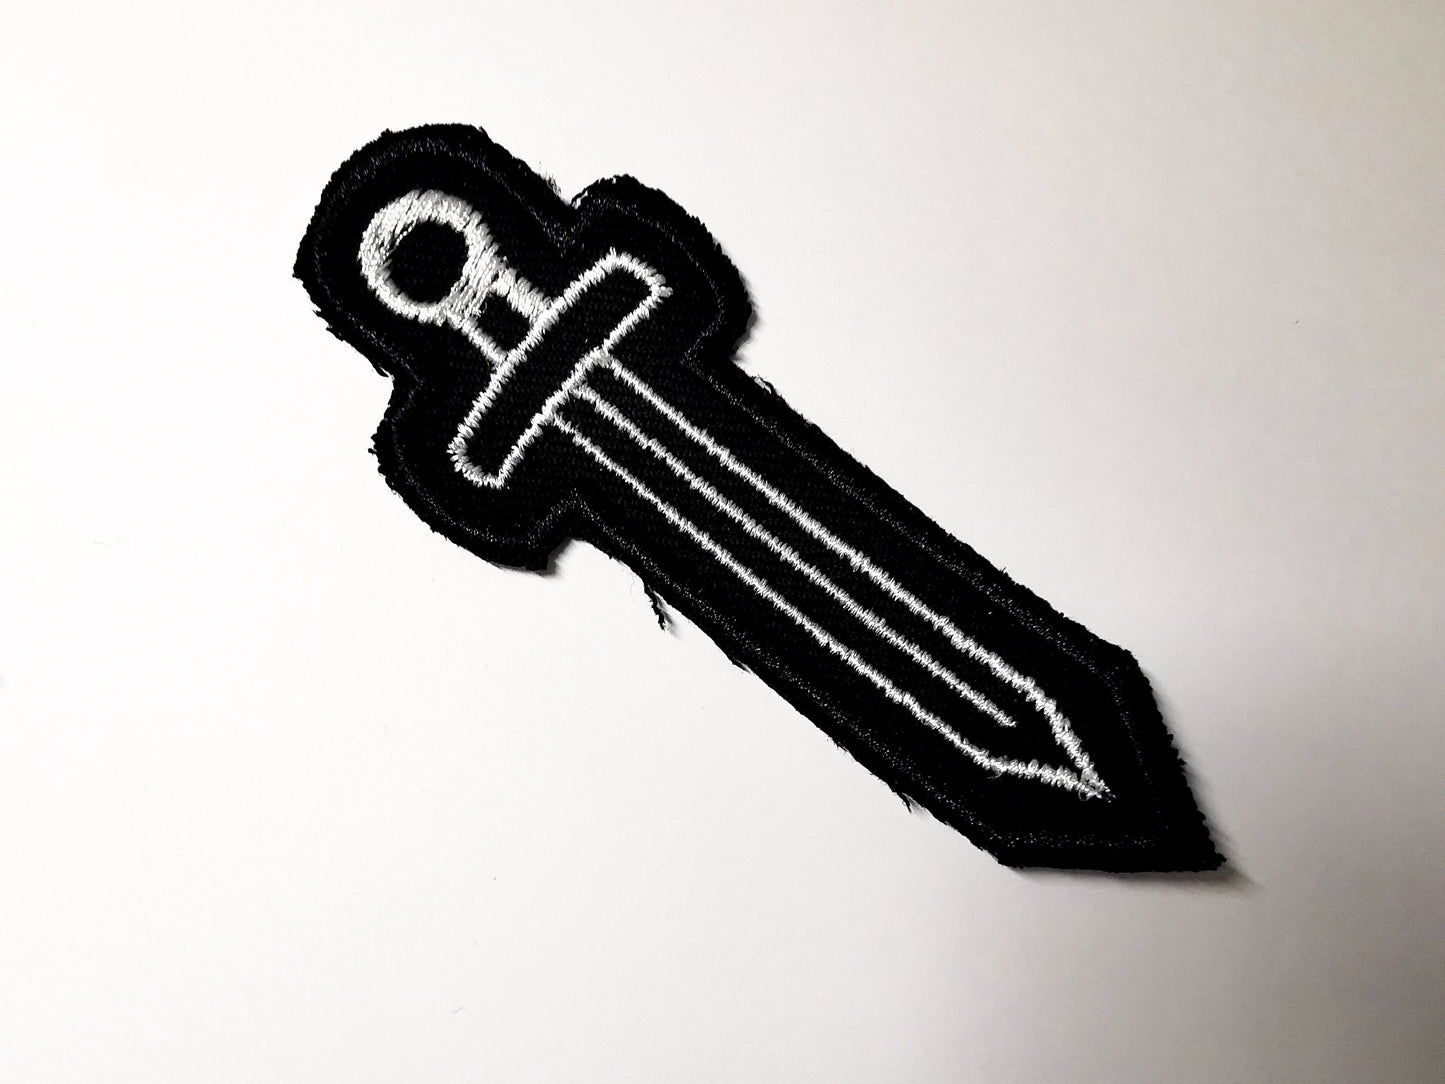 Sword and Bow Arrow Embroidered Iron On Patch Destiny Fantasy RPG Vikings Medieval Dungeon Gaming